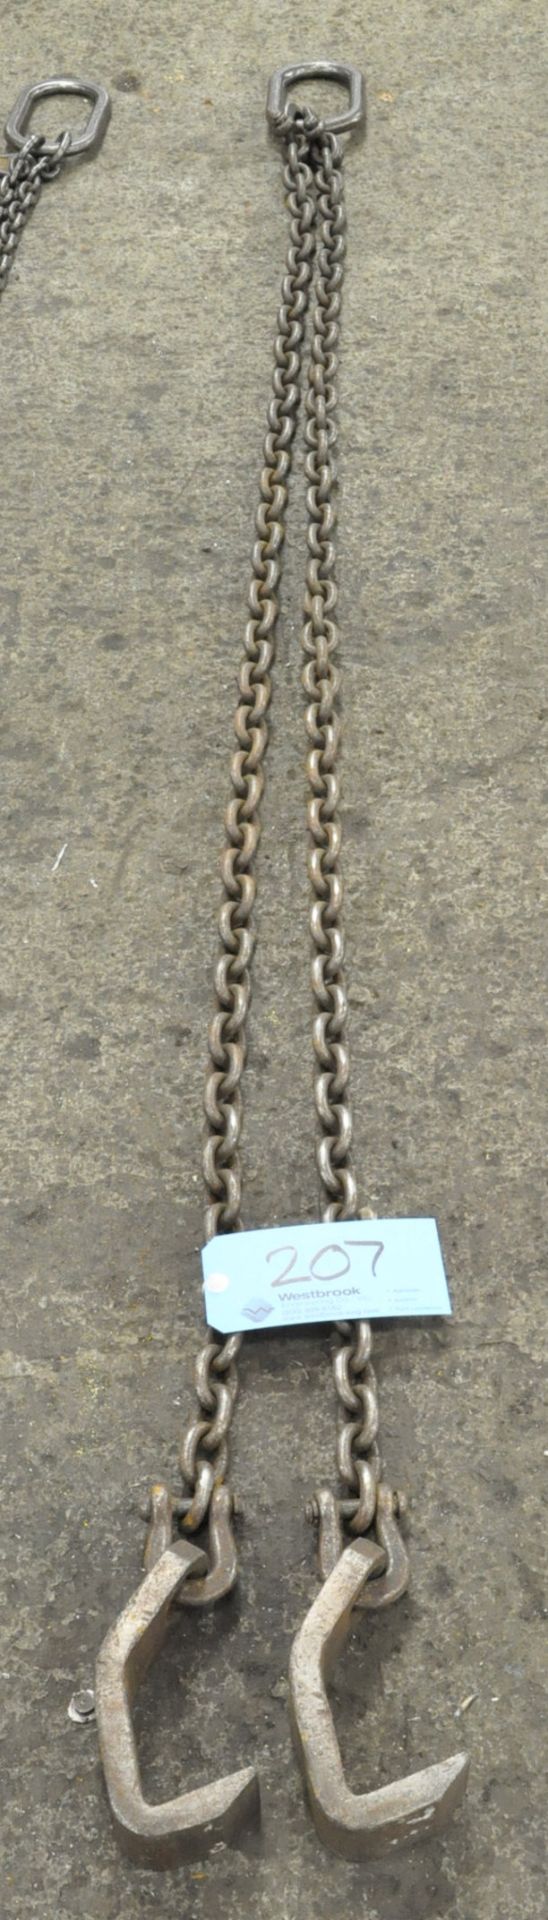 3/8" Link x 6' 2-Hook Chain Sling